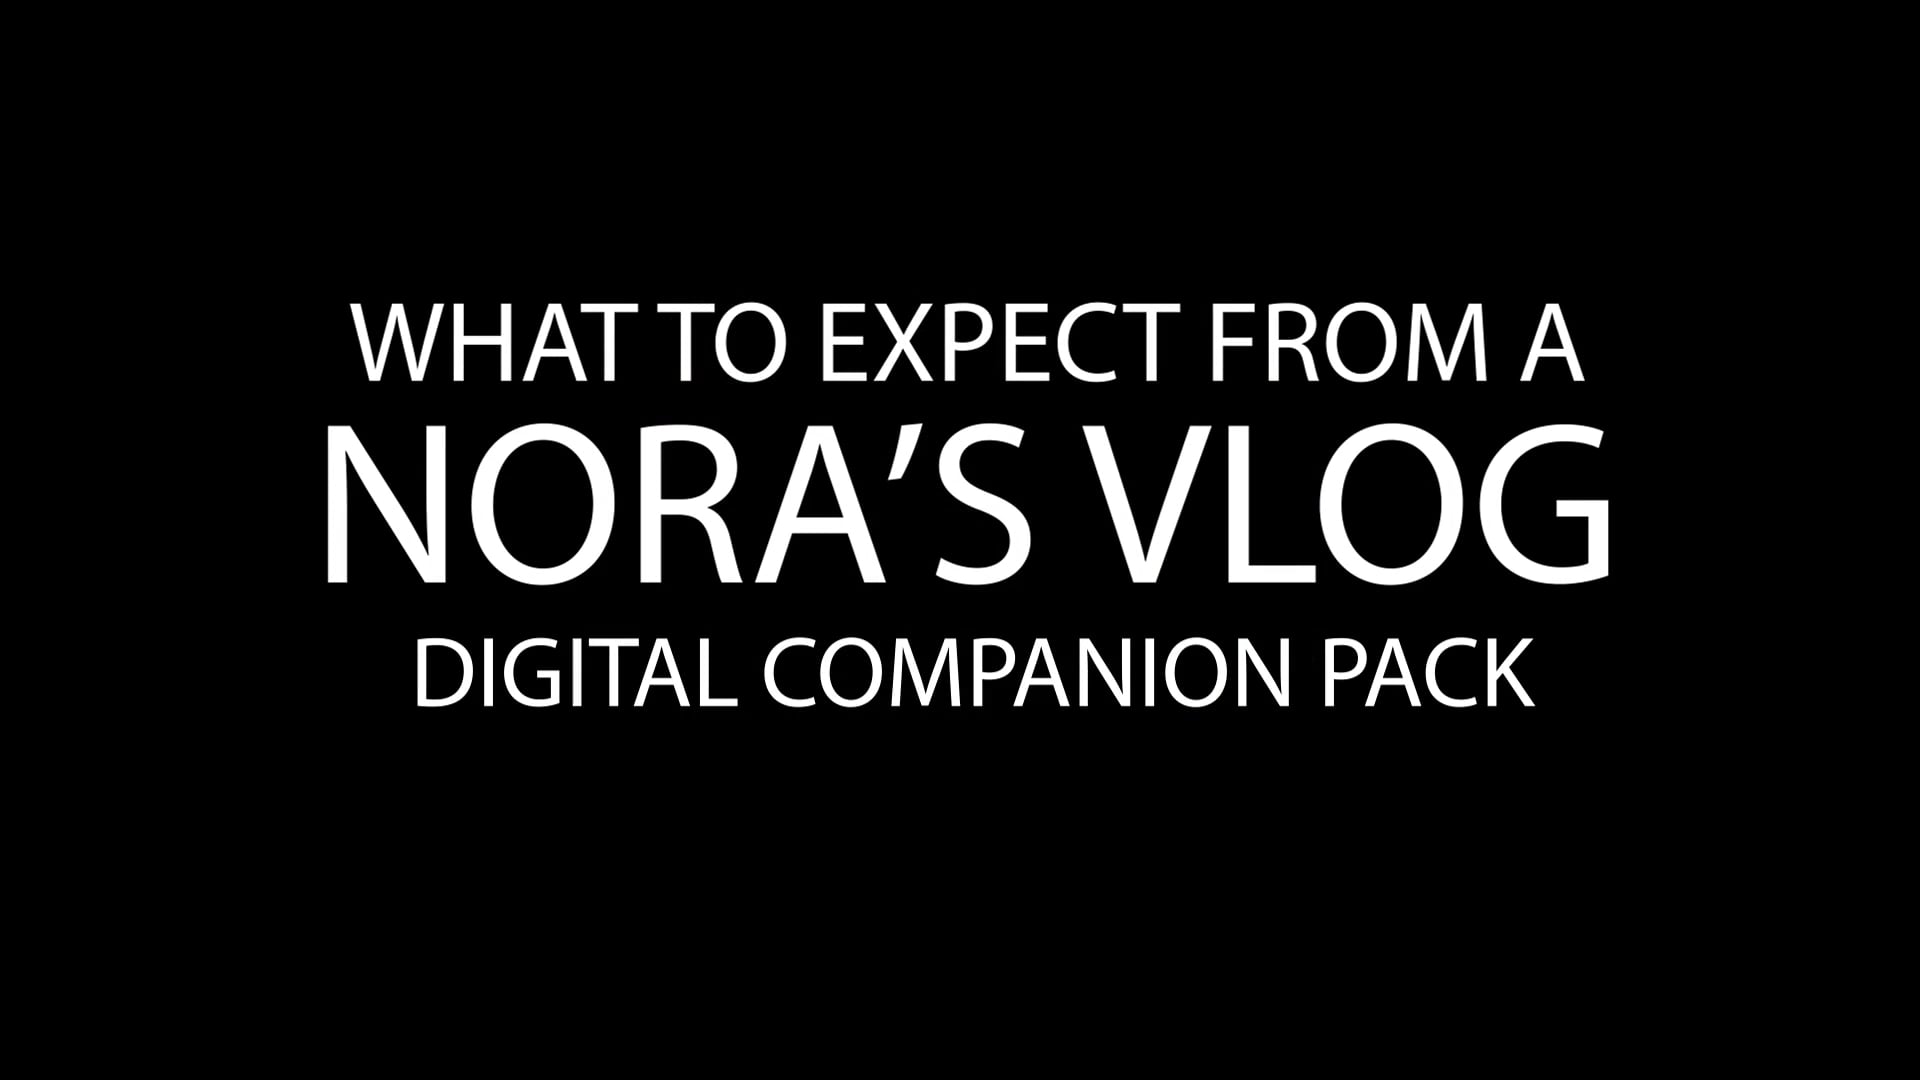 New Noras Vlog Companion Pack Trailer